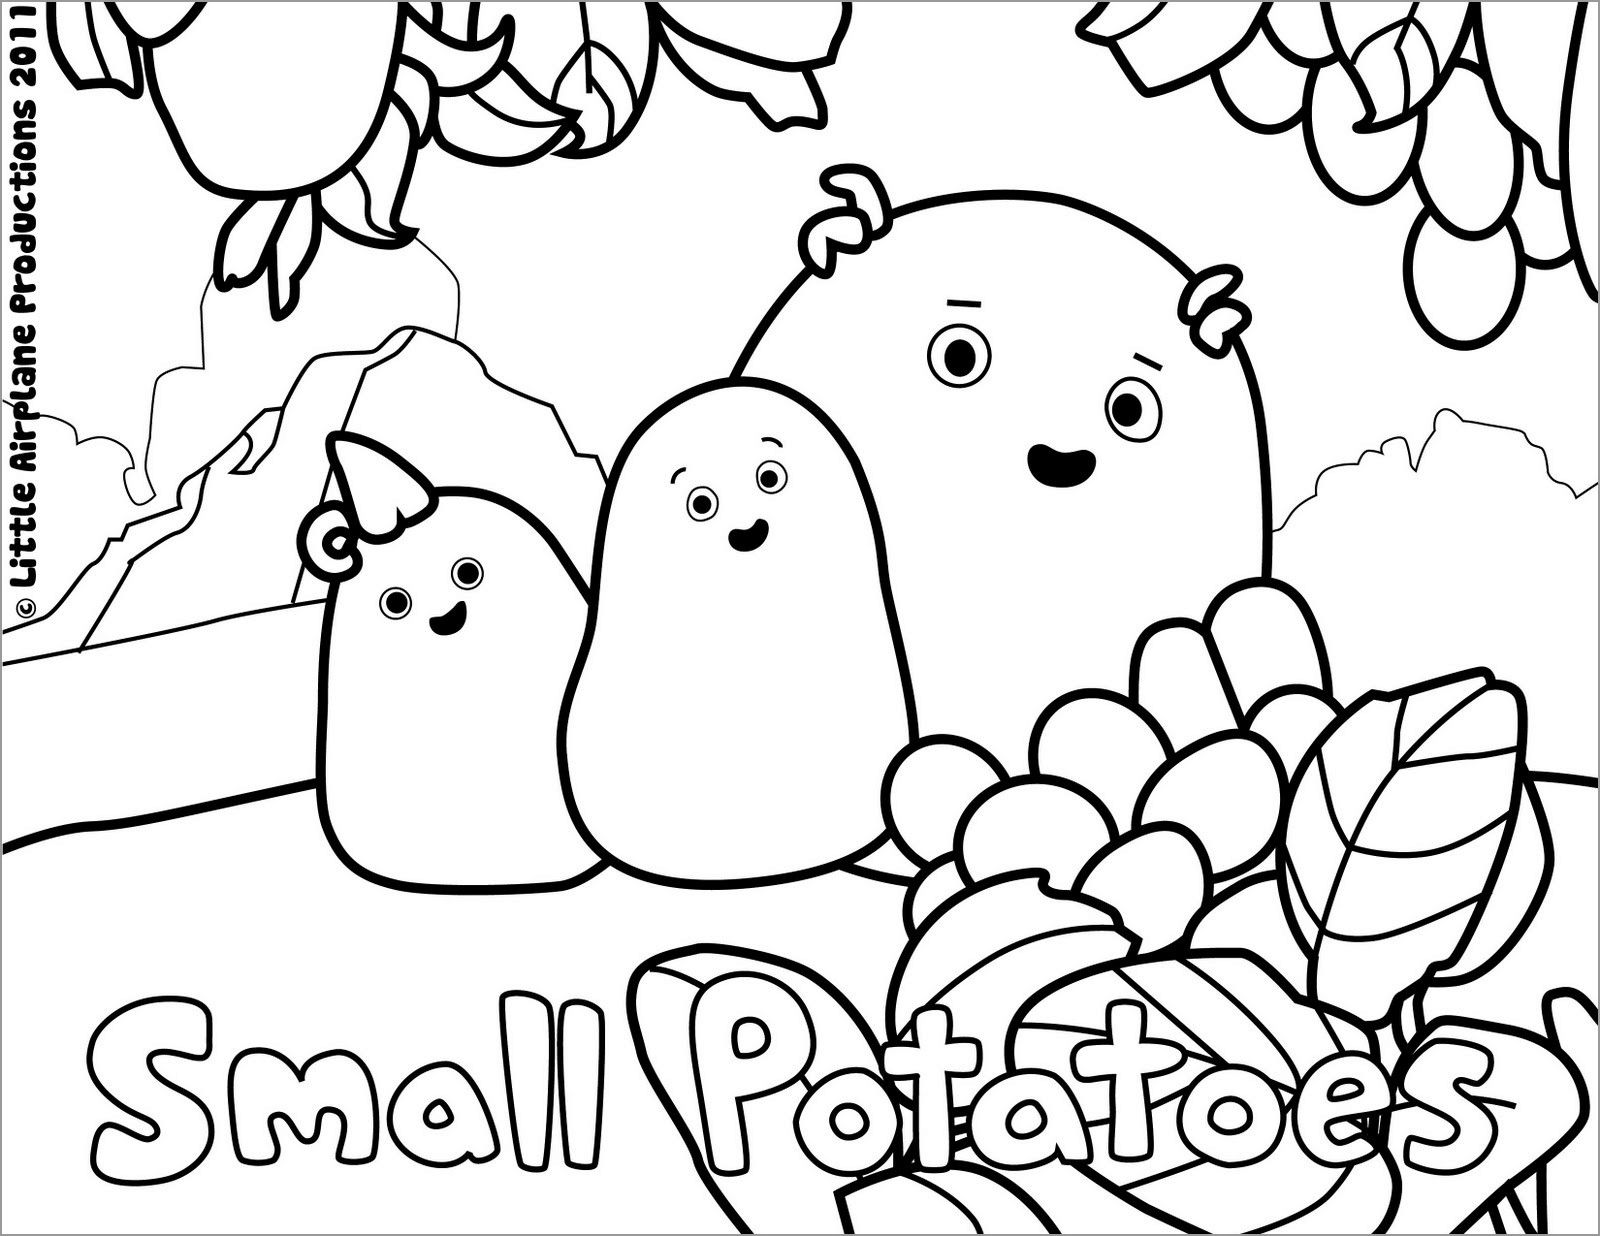 Cute Potatoes Coloring Page for Kids